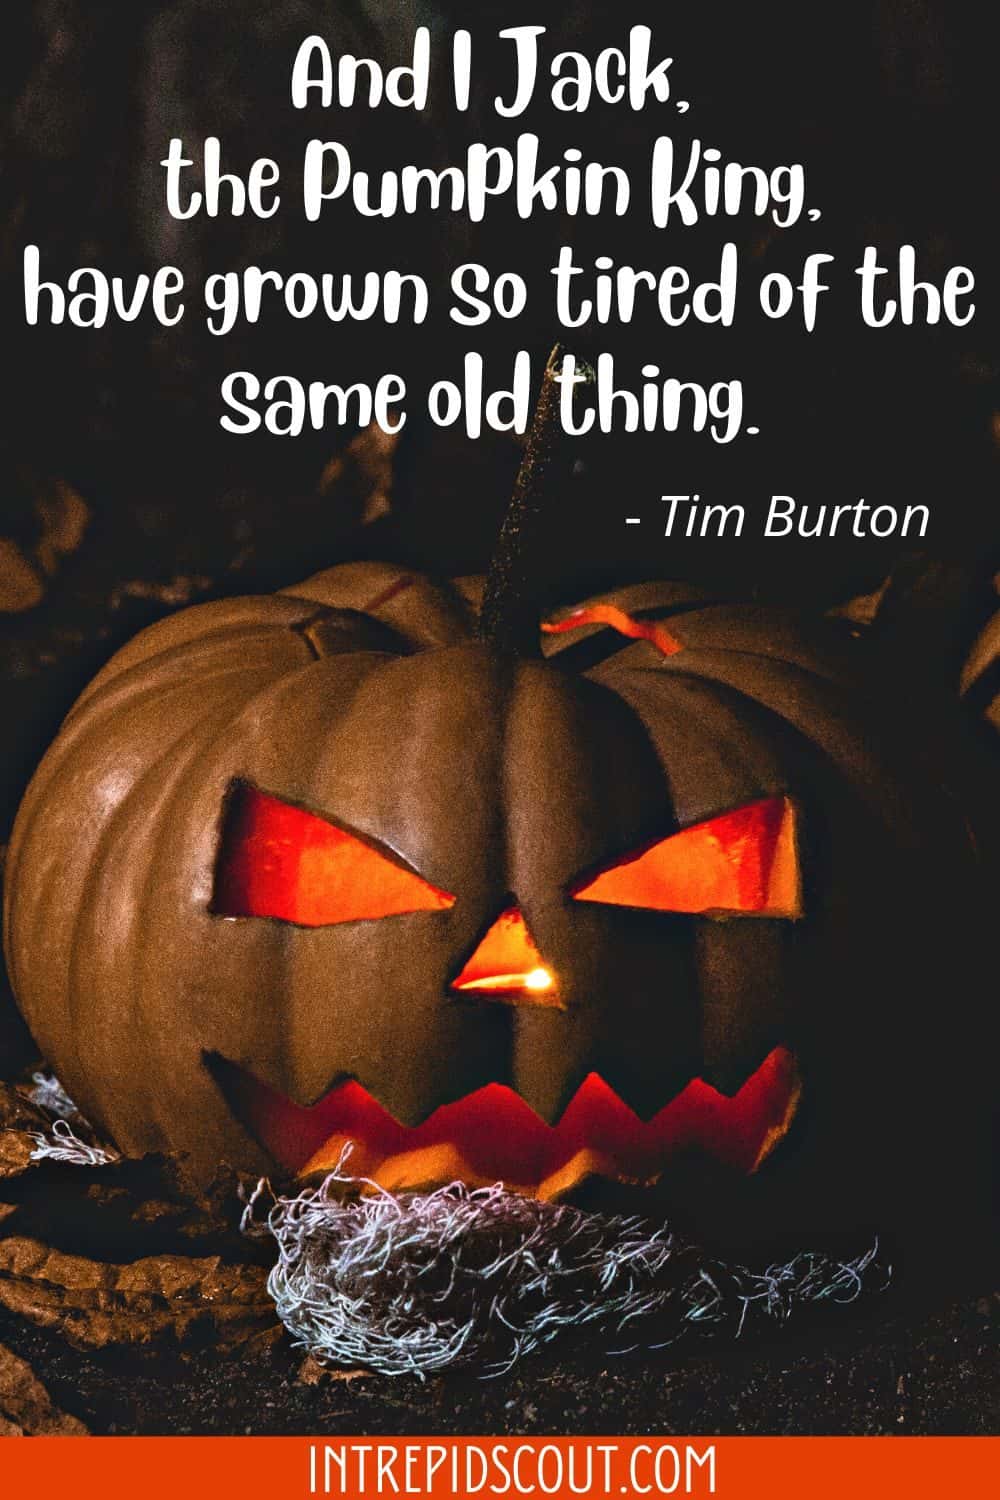 Jack-o'-lantern Captions and Quotes